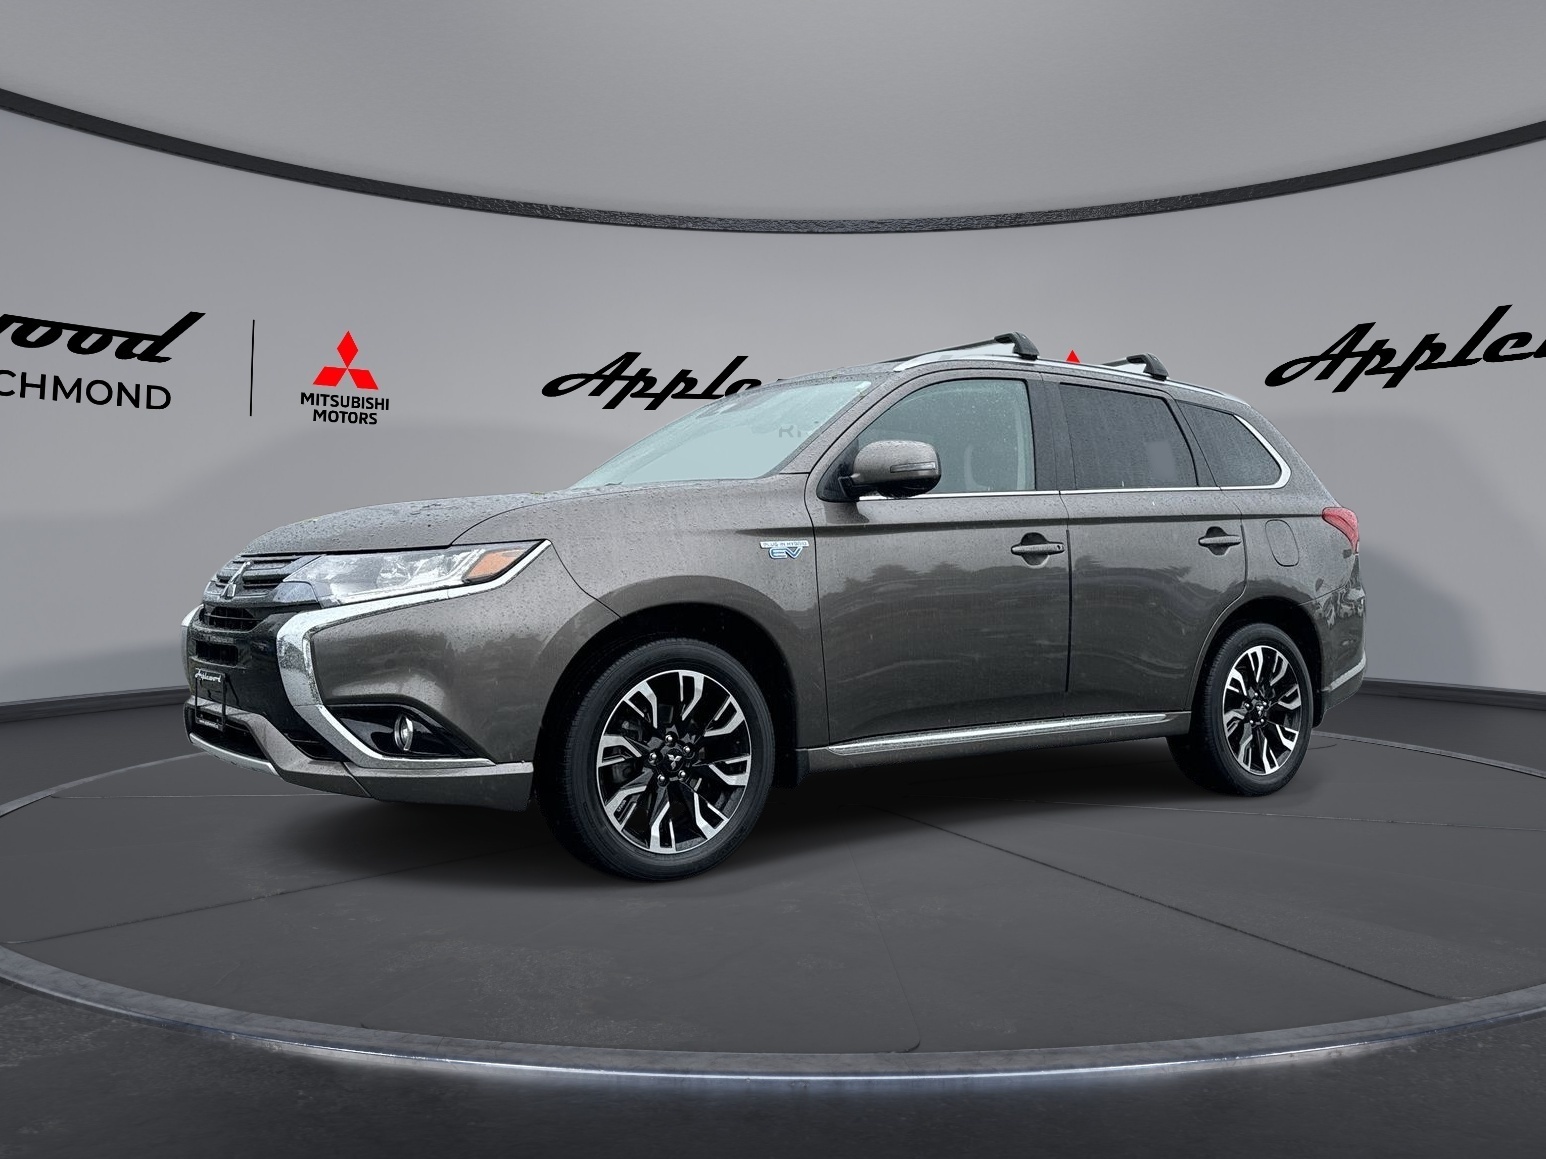 2018 Mitsubishi Outlander PHEV GT S-AWC; LOCAL | 1 OWNER | 5% TAX ONLY